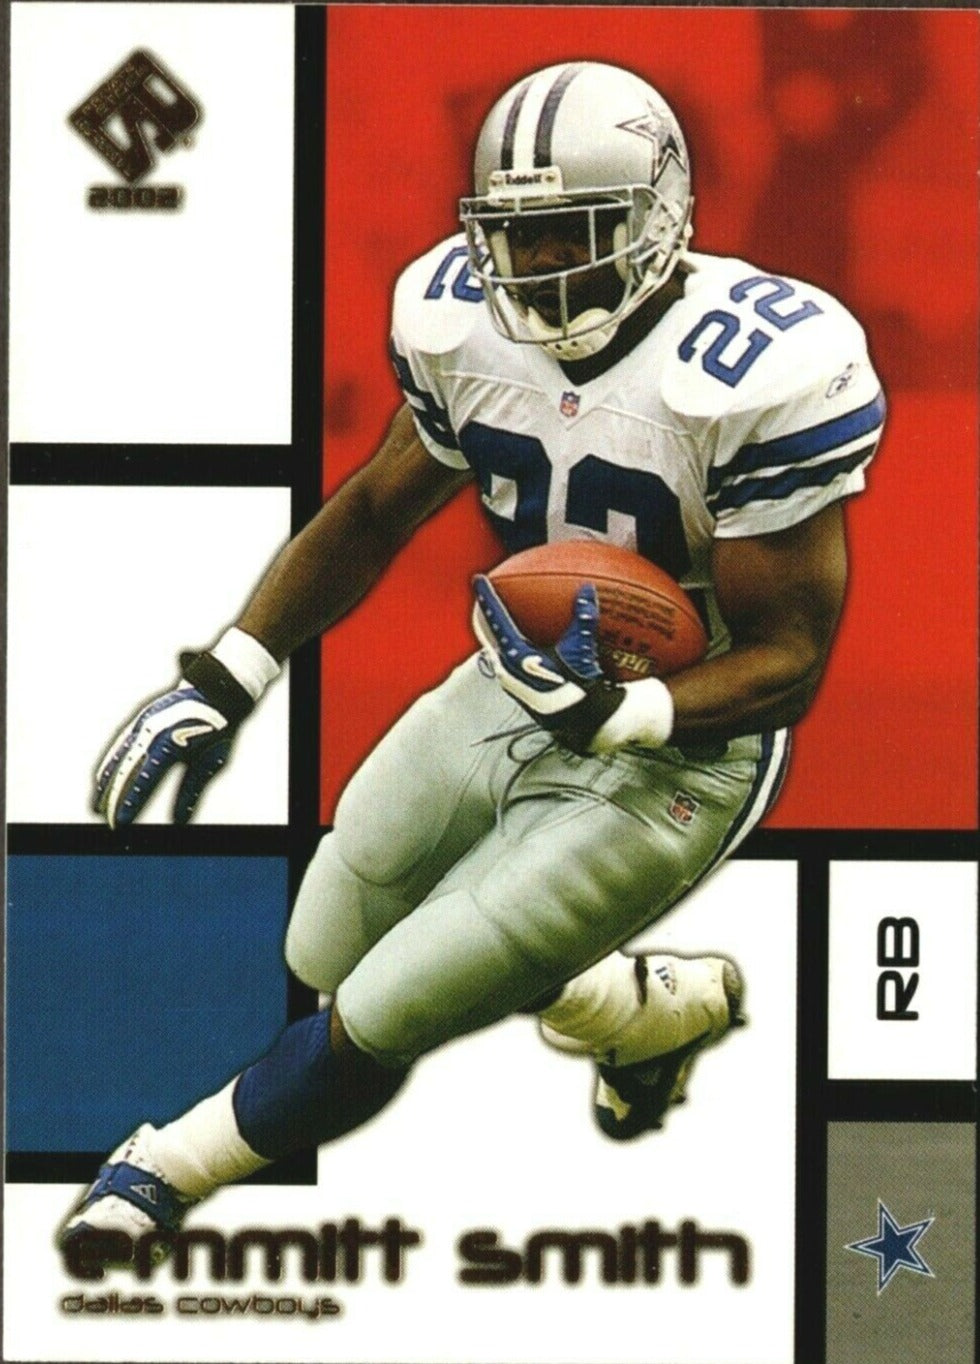 Emmitt Smith 2002 Pacific Private Stock Series Mint Card #28